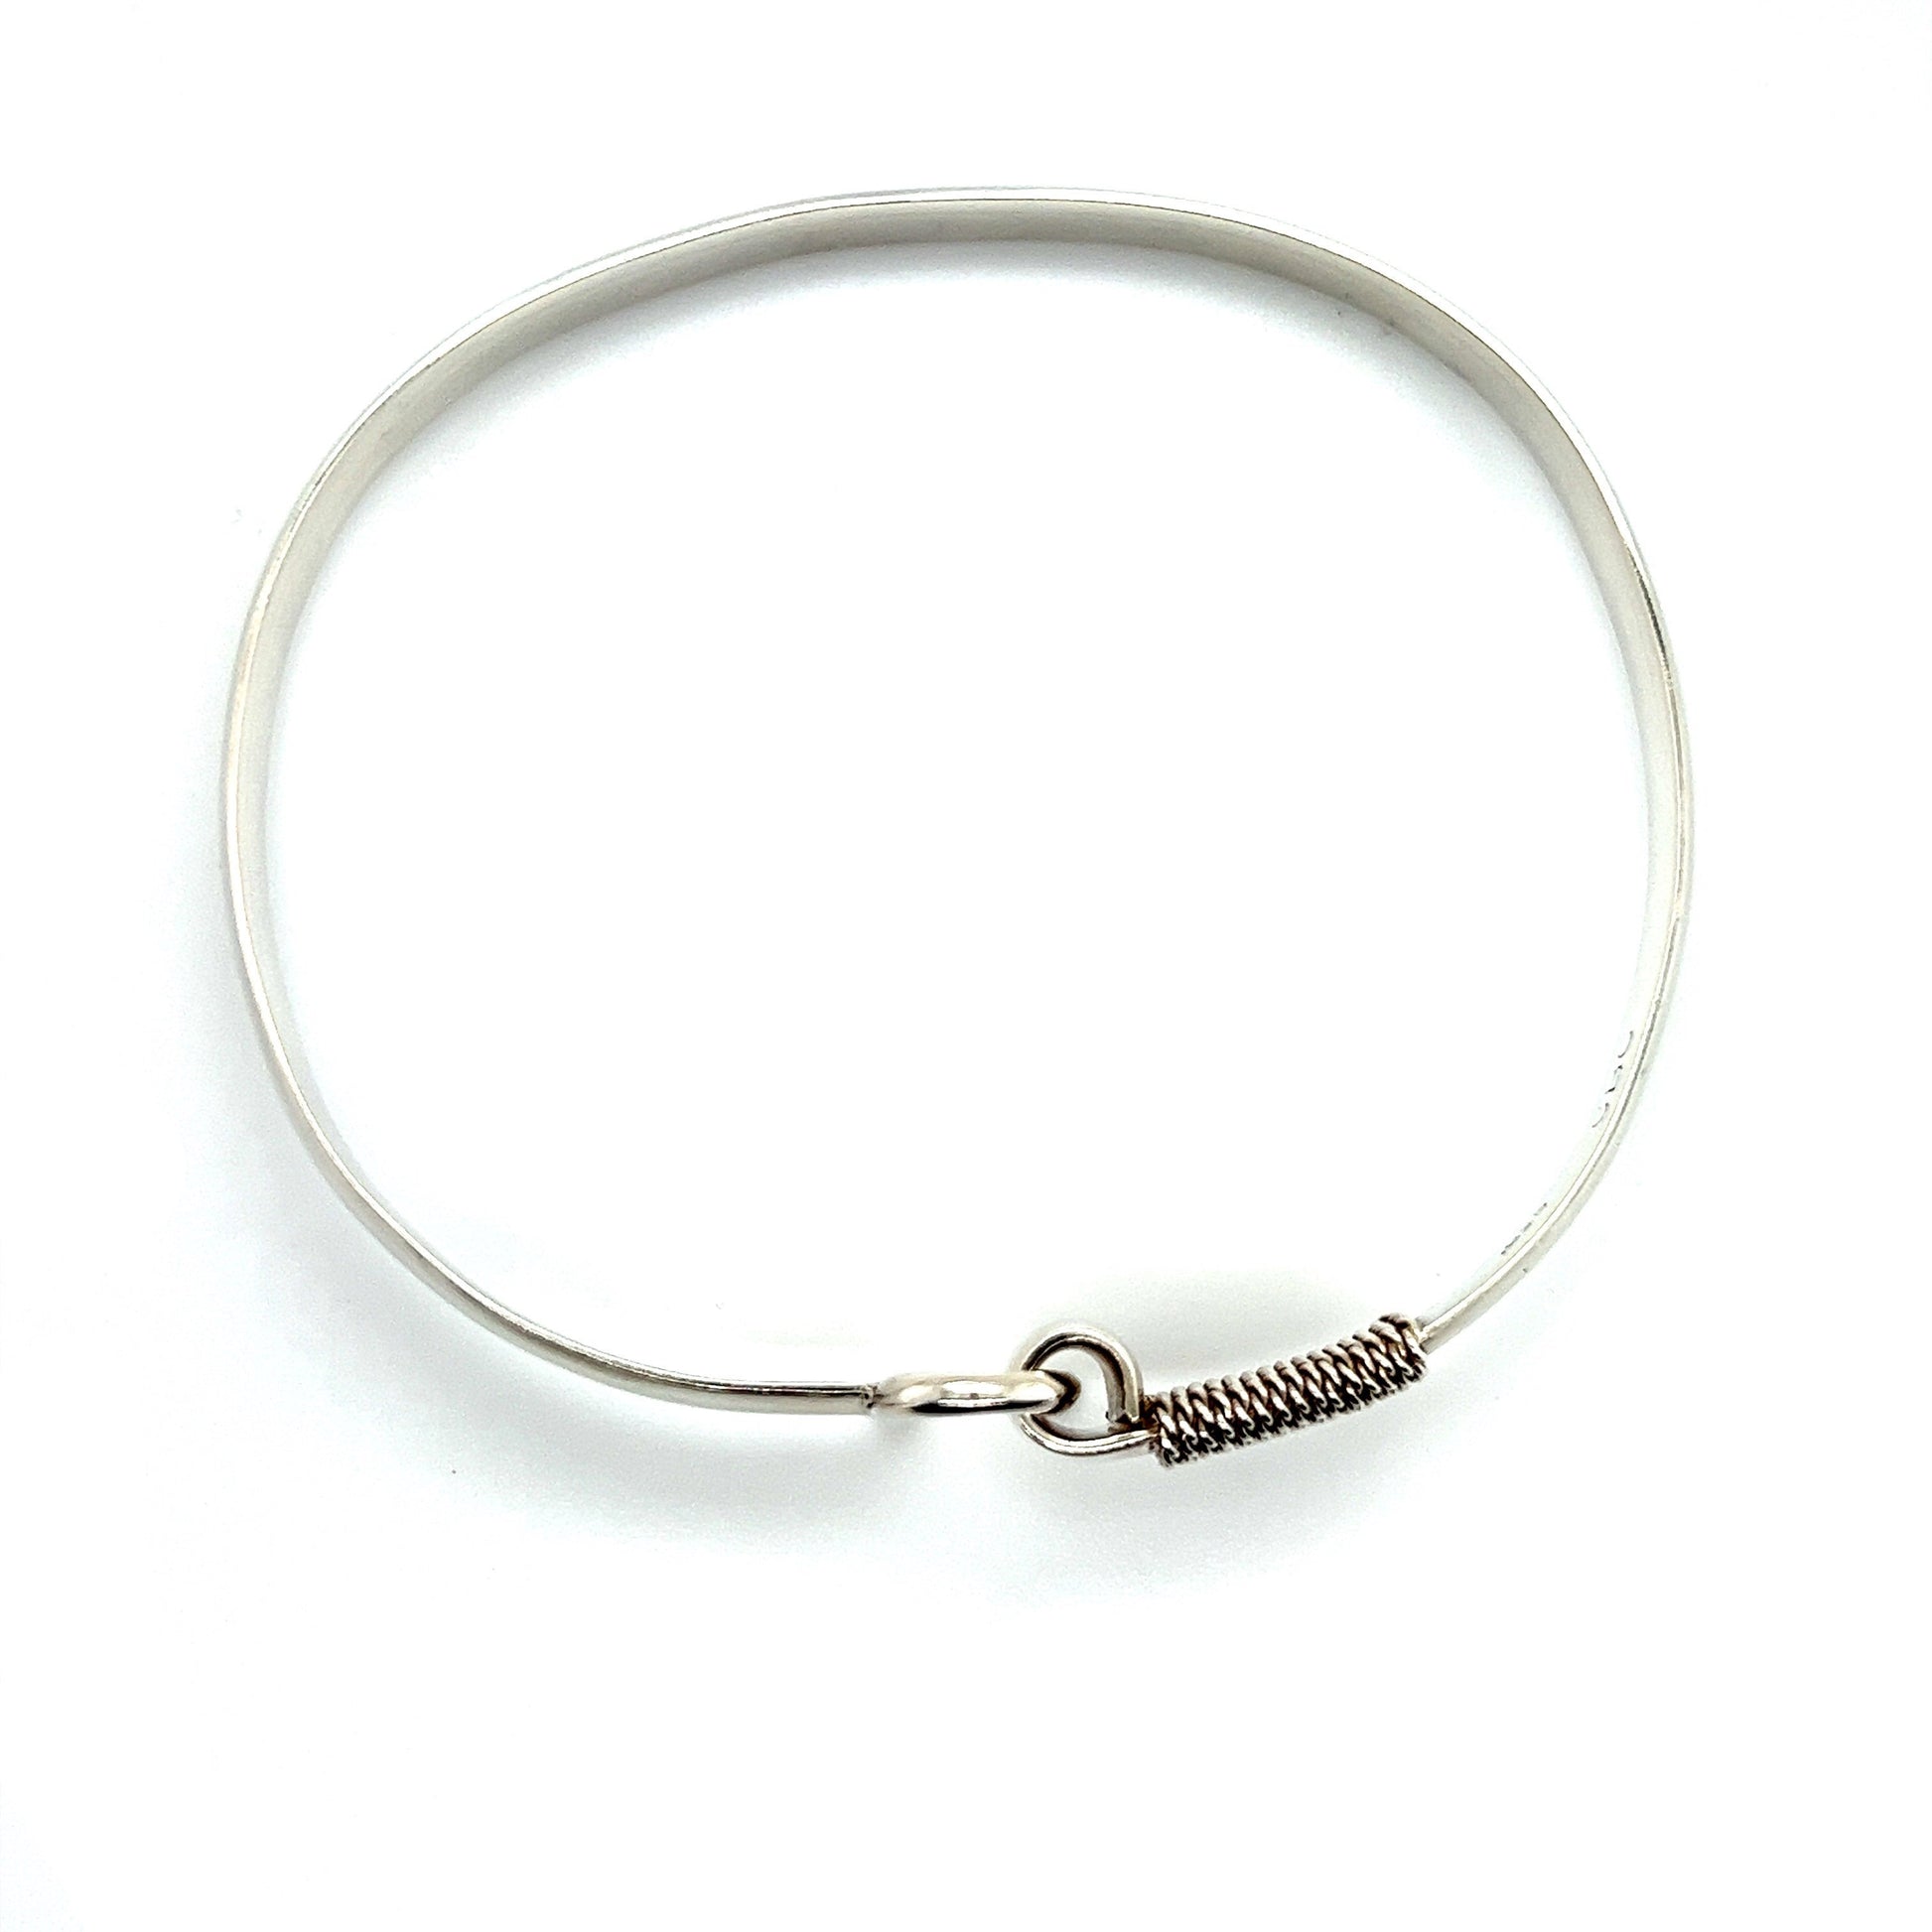 U Flat 6mm Bangle Bracelet with U-Hook Clasp in Sterling Silver Top View